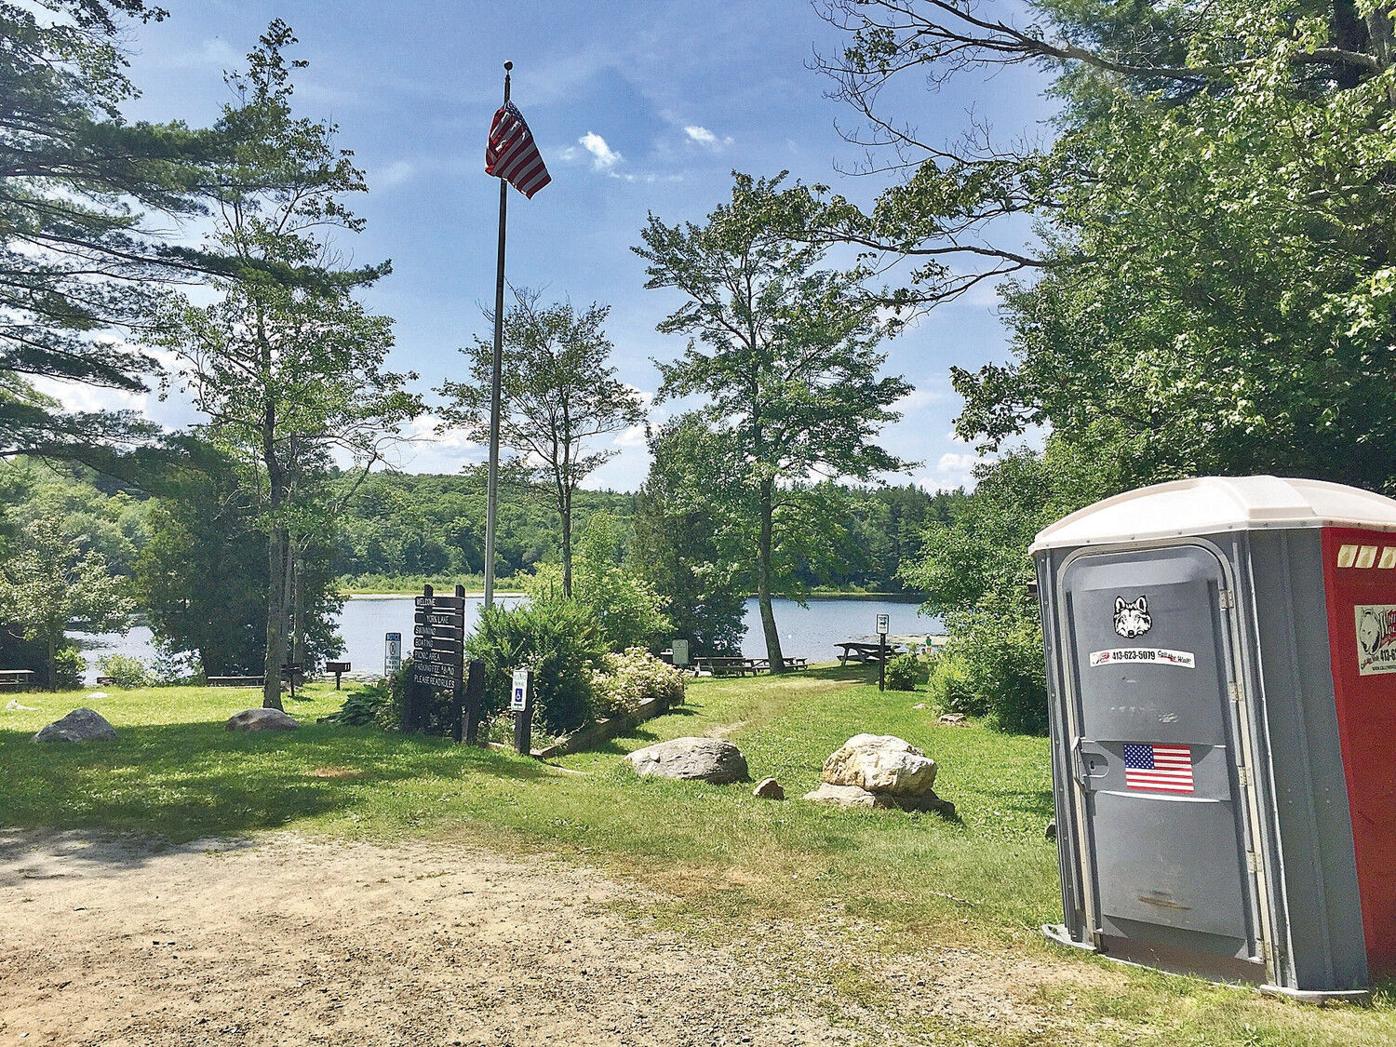 York Lake bathrooms another victim of state park cuts